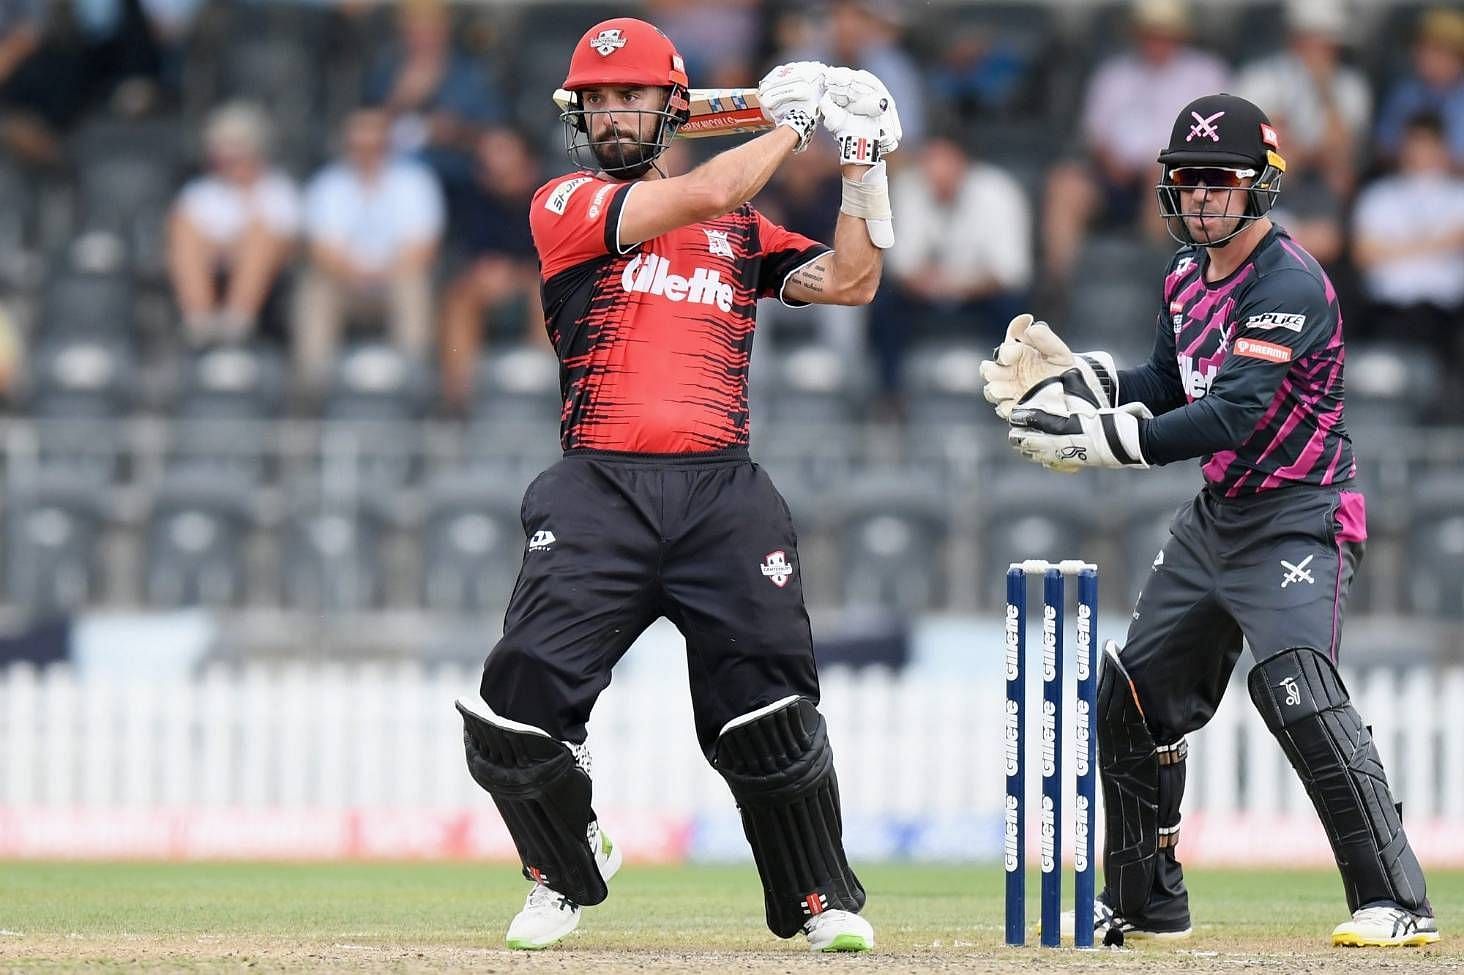 Daryl Mitchell and Matt Henry headline the complete roster of Canterbury Kings players